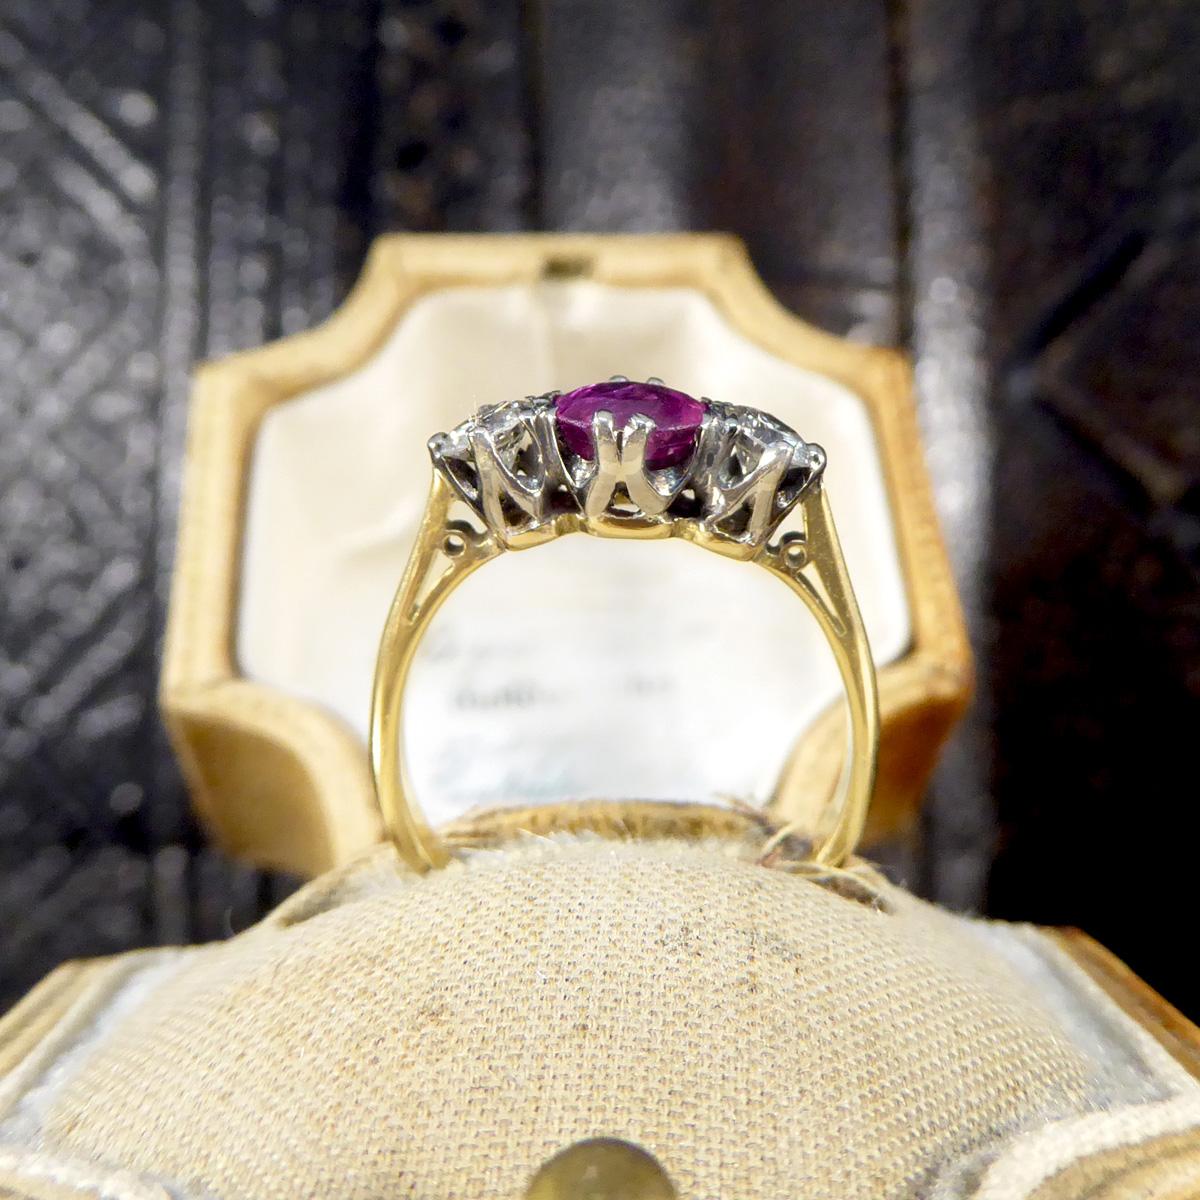 Early 20th Century Ruby and Diamond Three Stone Ring in 18ct Yellow Gold & Plat 3